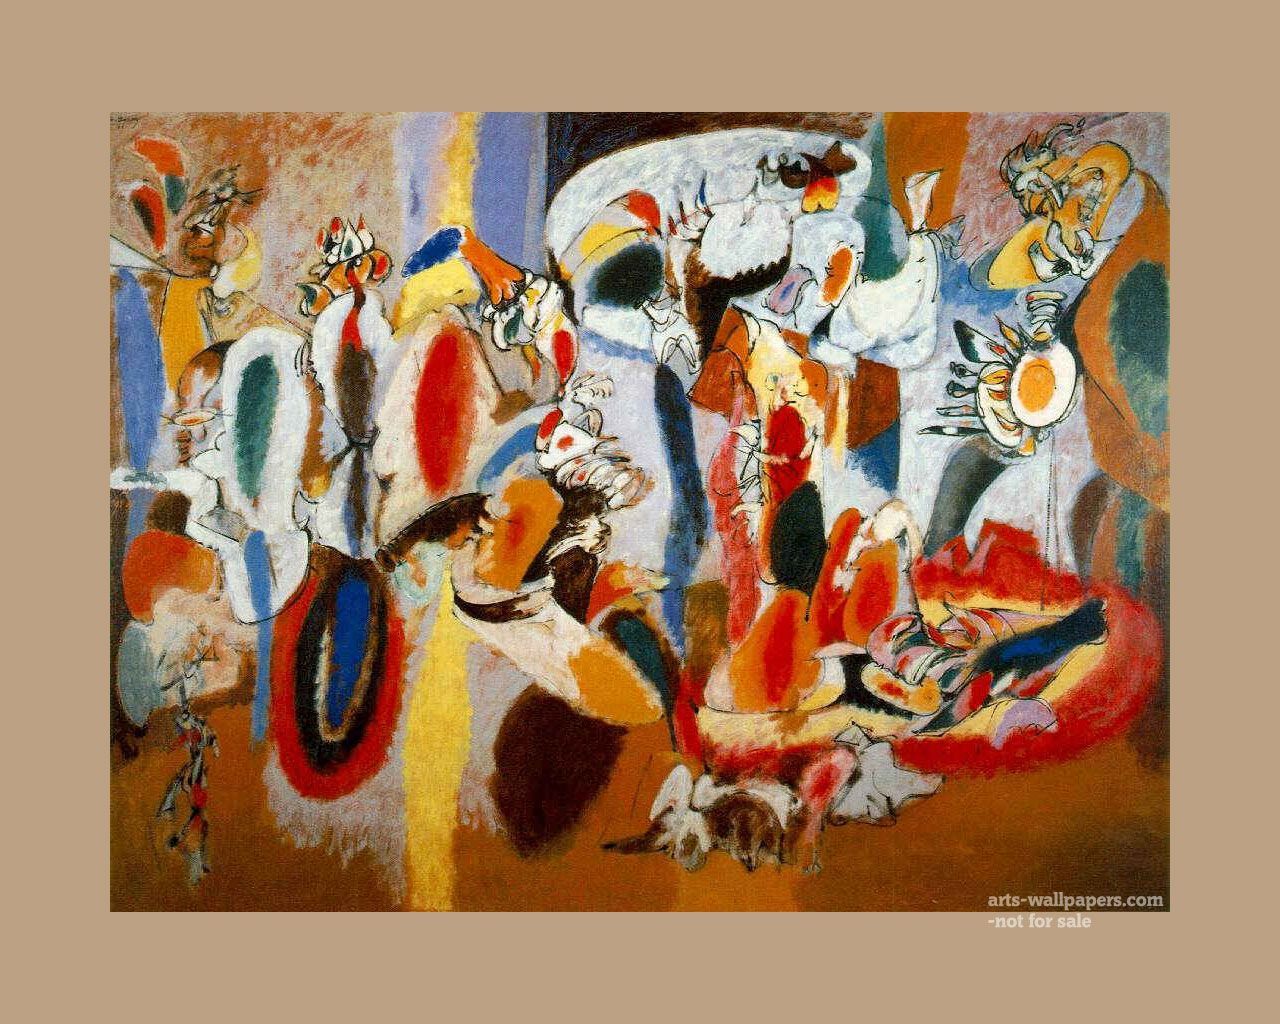 Artist is Arshile Gorky. Don't own this one, but like it. Abstract expressionism art, Abstract expressionism, Art movement